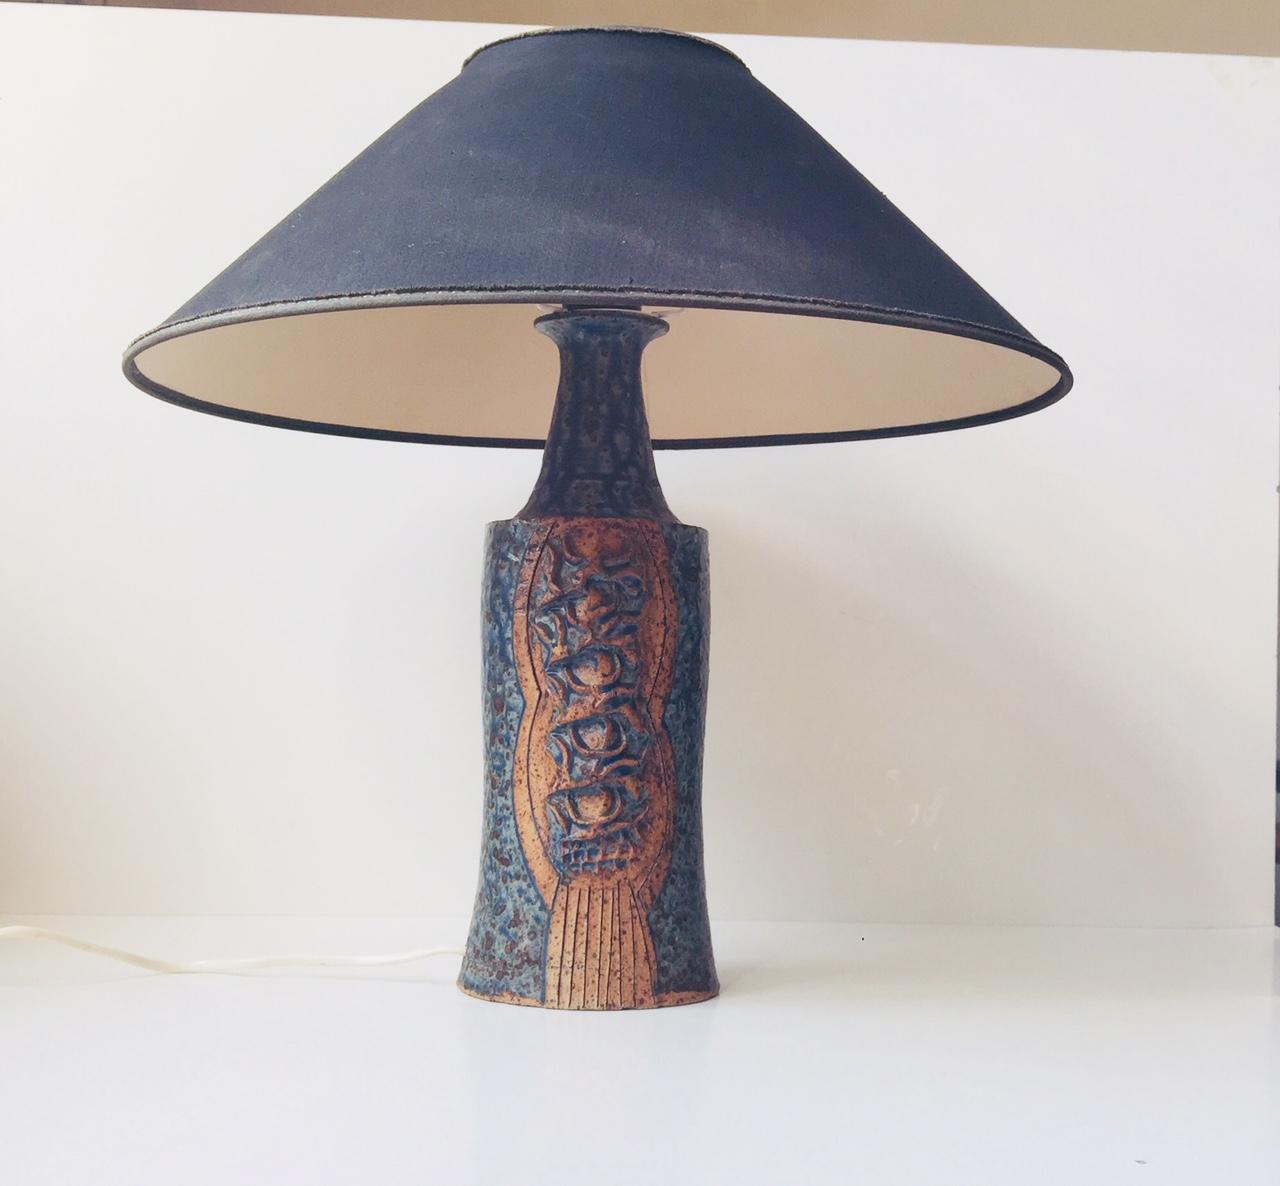 Exceptional table lamp by an anonymous Scandinavian ceramist. It features delicate blue speckled glaze reminiscent of Gunnar Nylund and architectural features to the exposed and textured center. It is signed to the inside of the base. The black